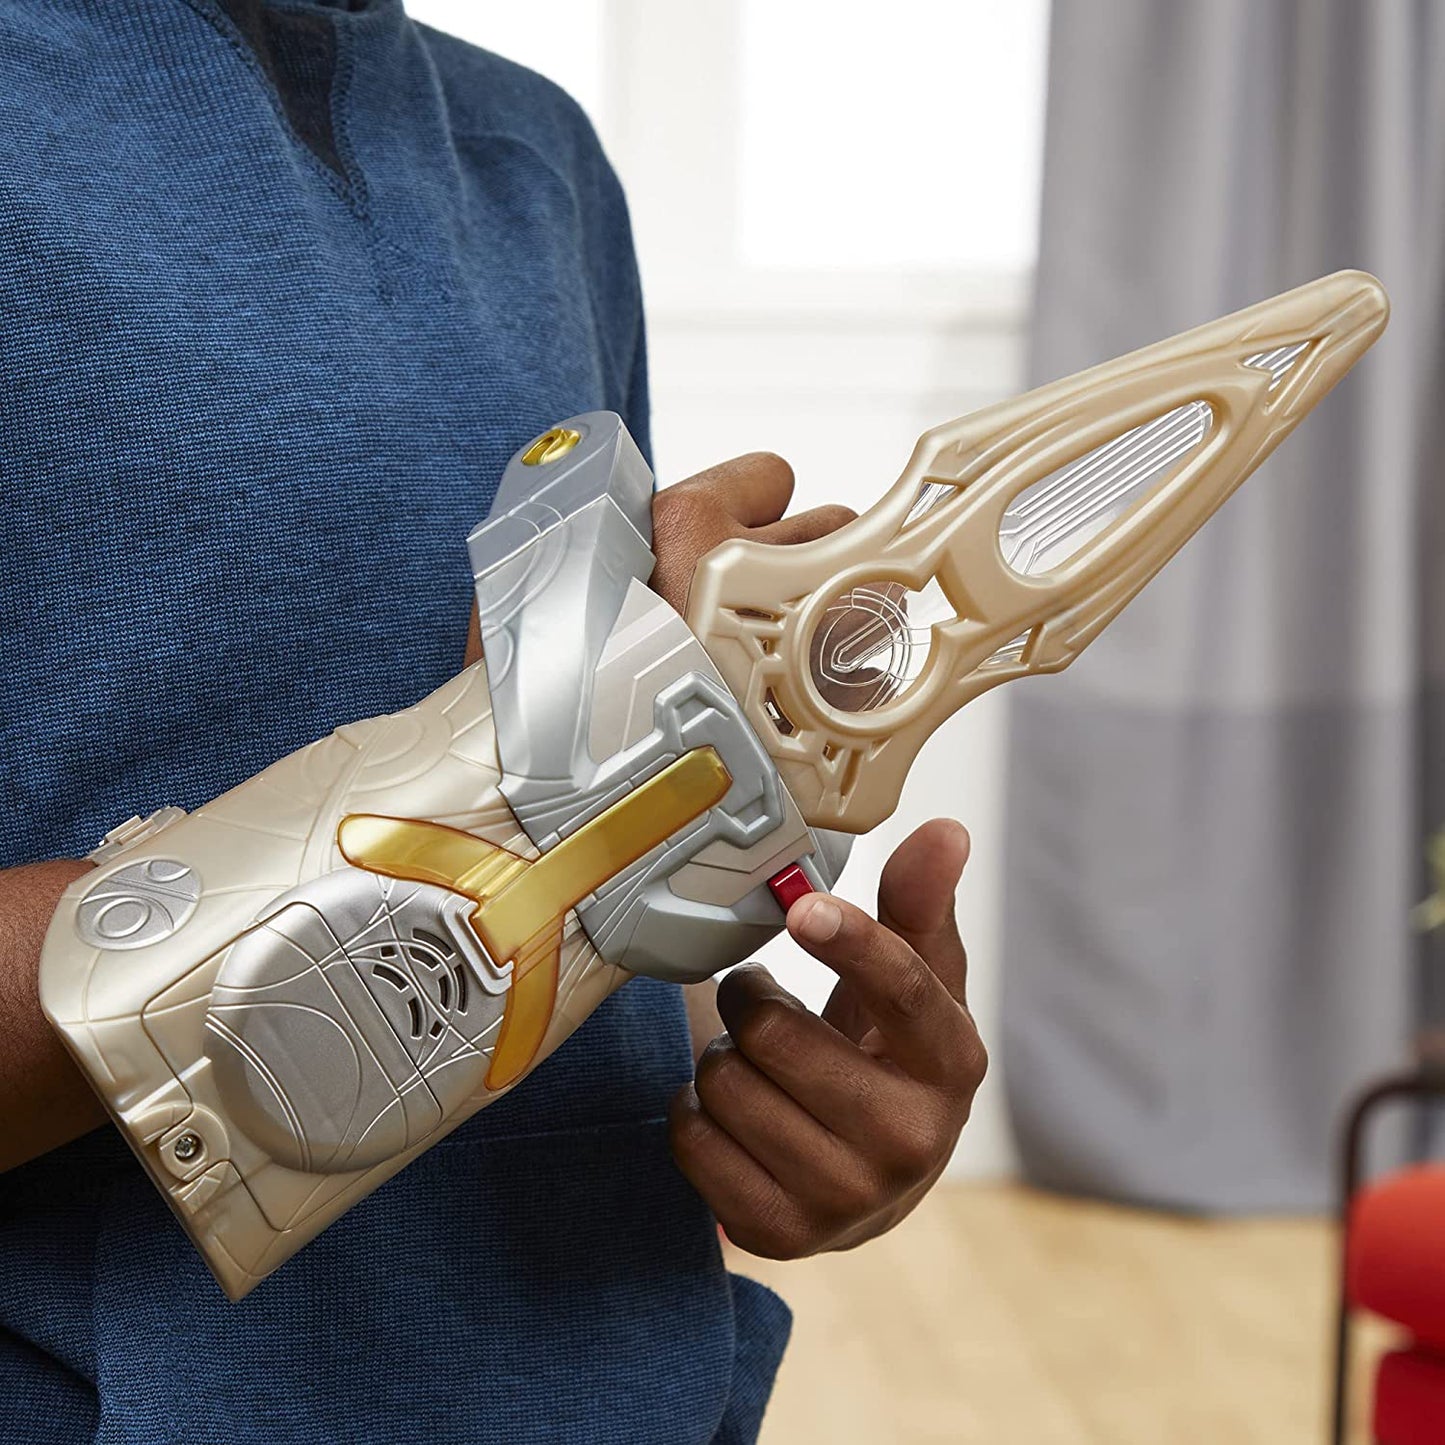 Marvel Hasbro The Eternals Cosmic FX Gauntlet Role Play Toy, Lights and Sounds, Inspired by The Eternals Movie, for Kids Ages 5 and Up